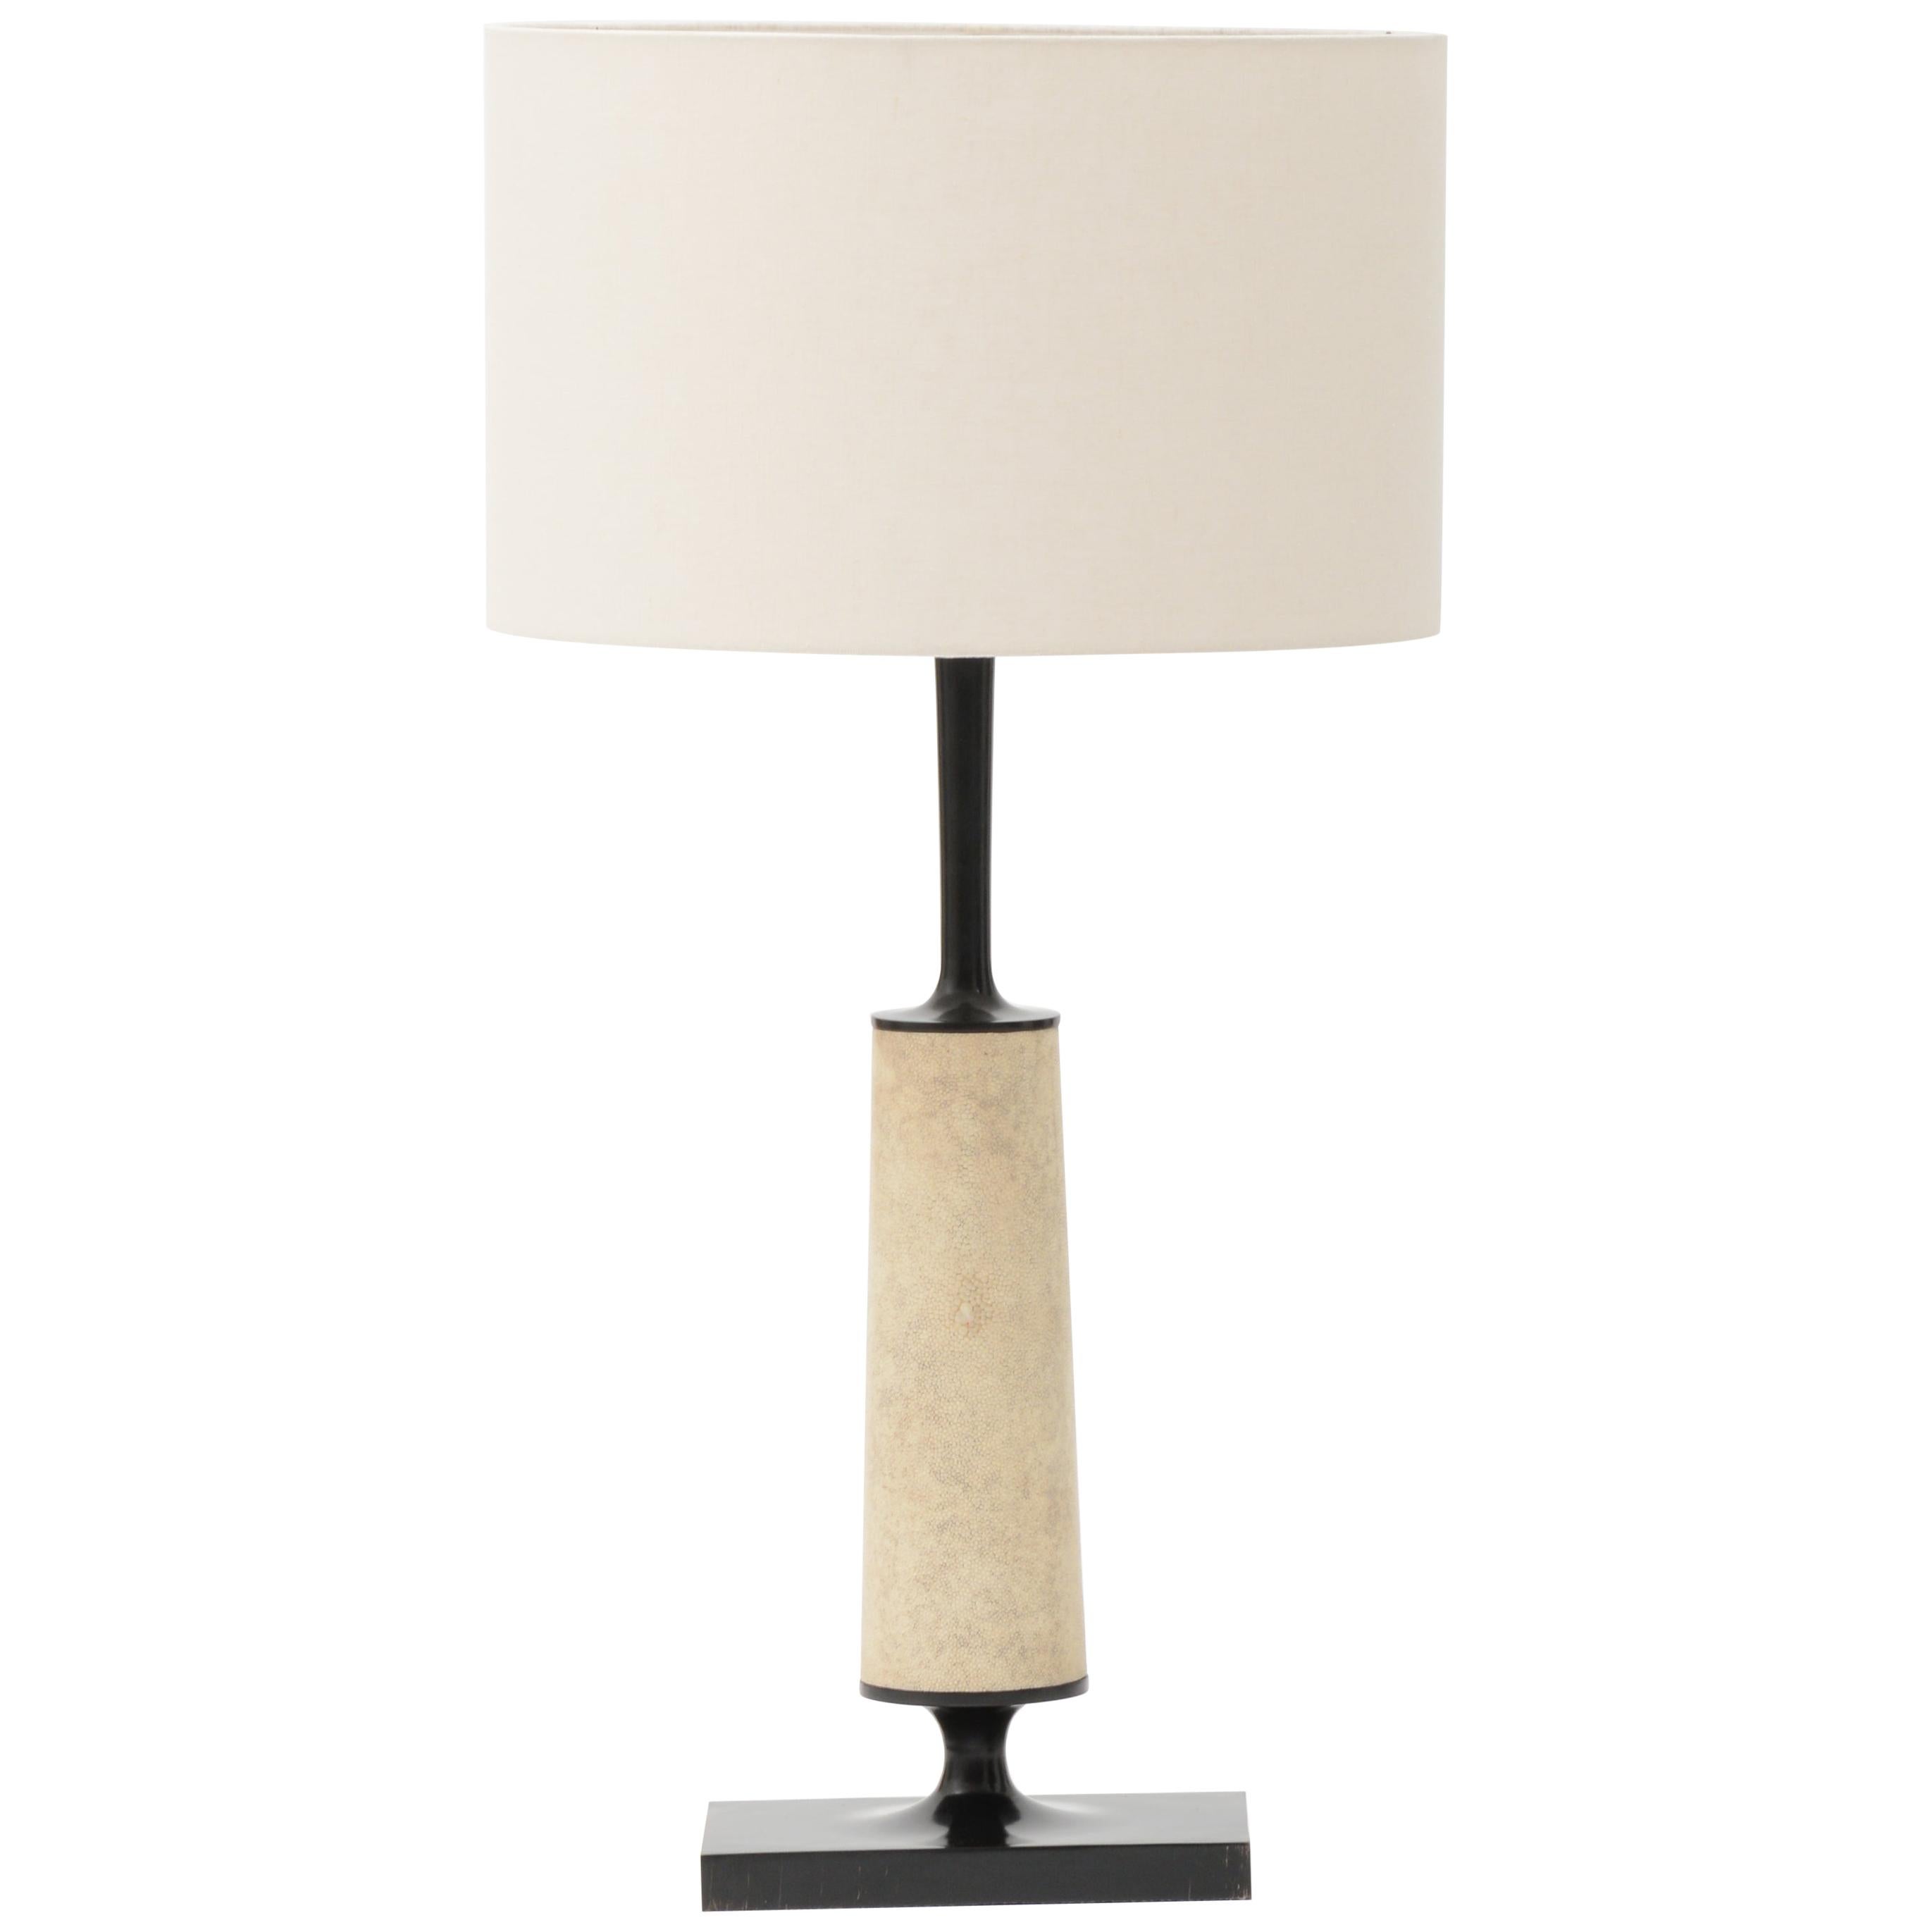 Jaya Table Lamp - Bronze and Shagreen Table Lamp by Elan Atelier